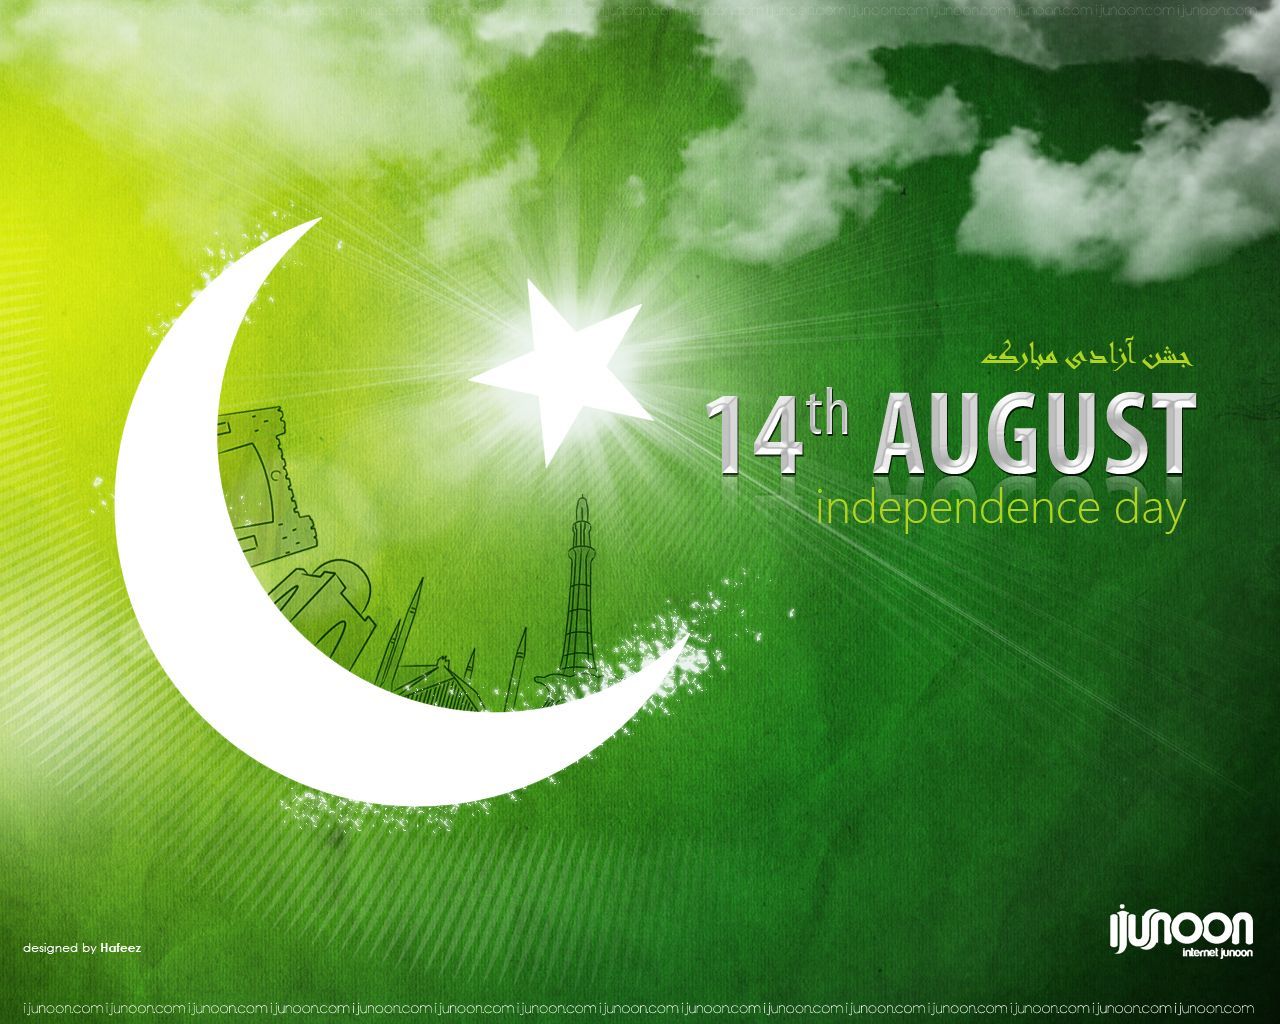 14th August independence day Wallpaper. Independence day wallpaper, Independence day, 14 august wallpaper